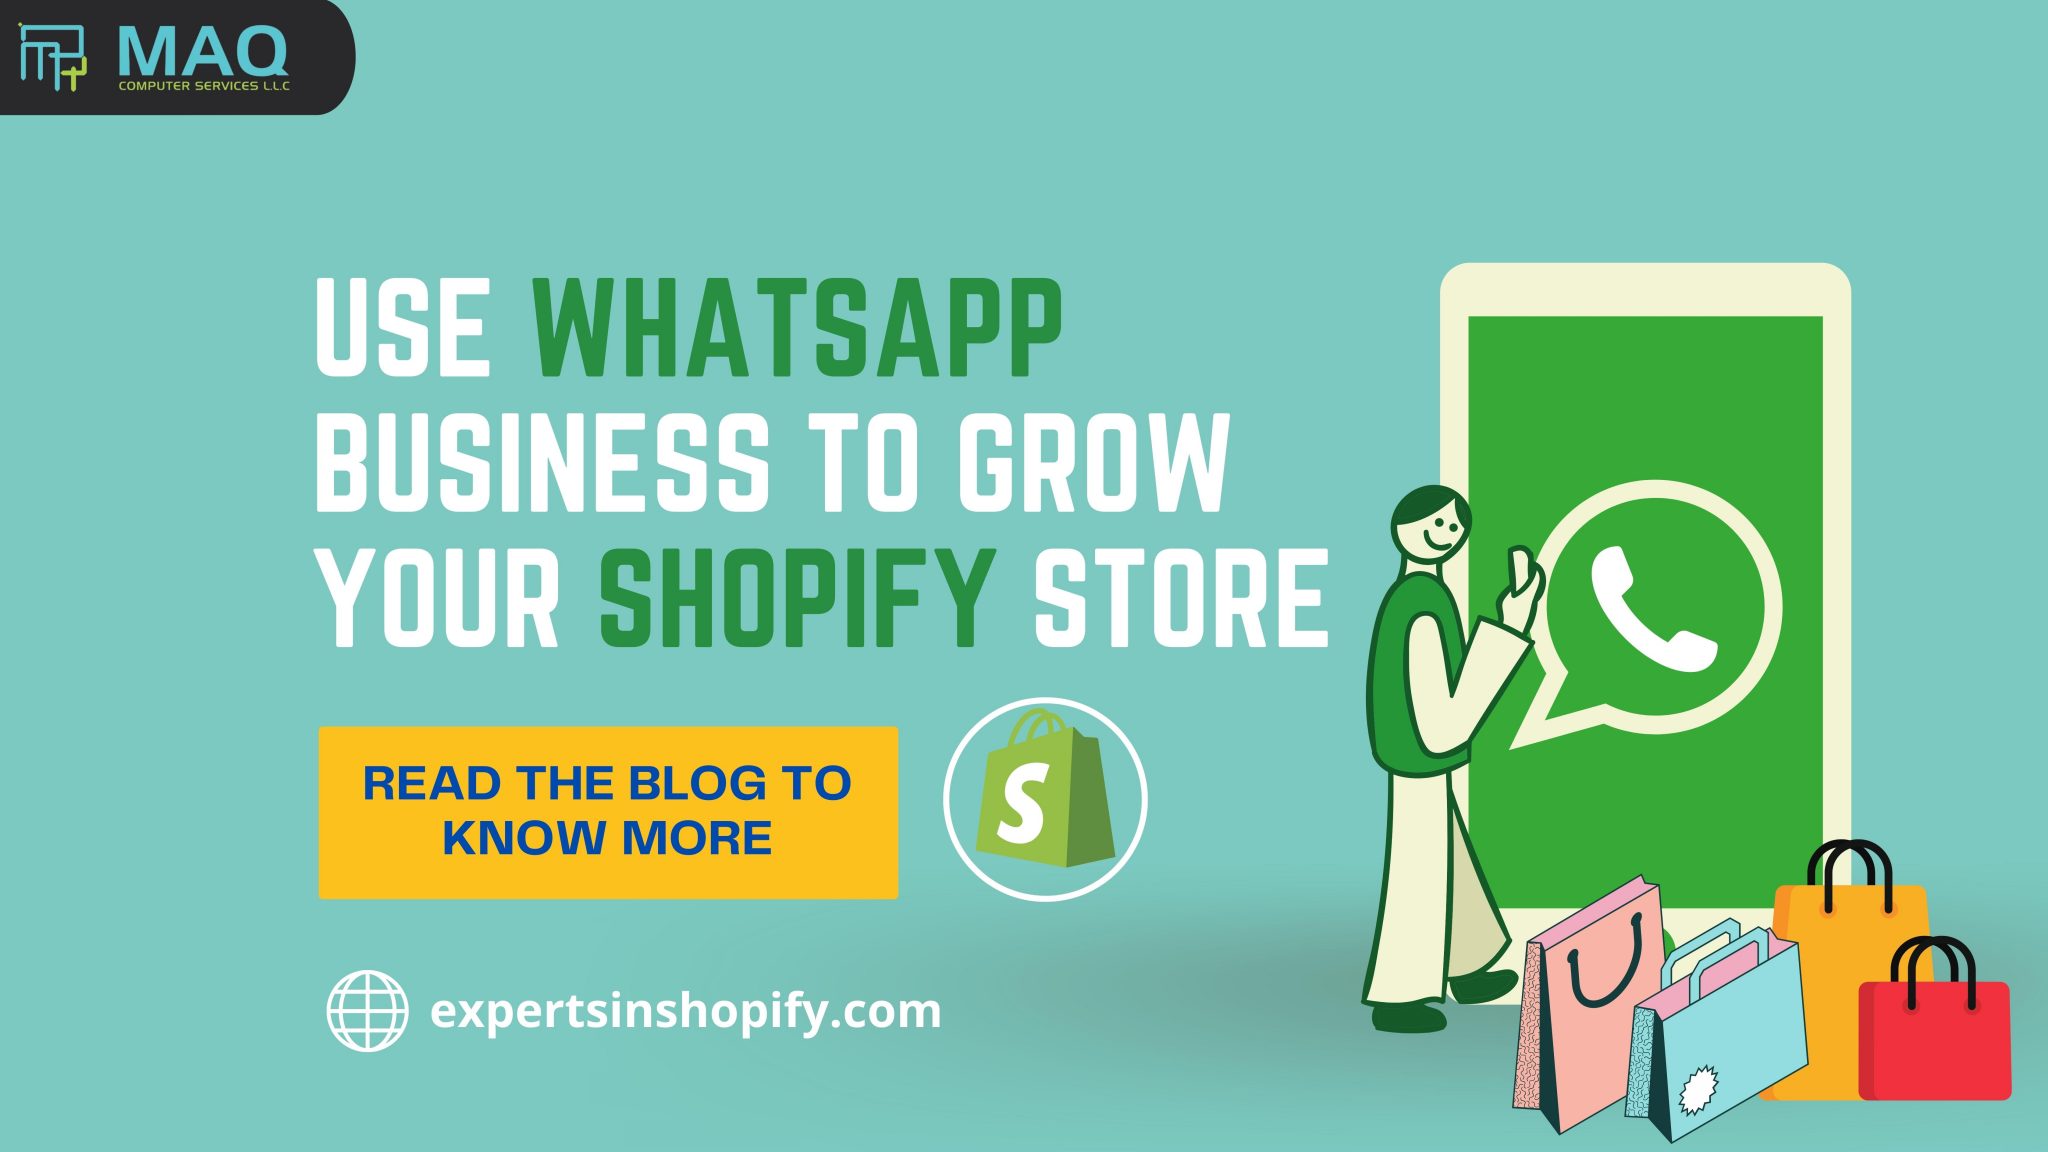 Use WhatsApp Business To Grow Your Shopify Store